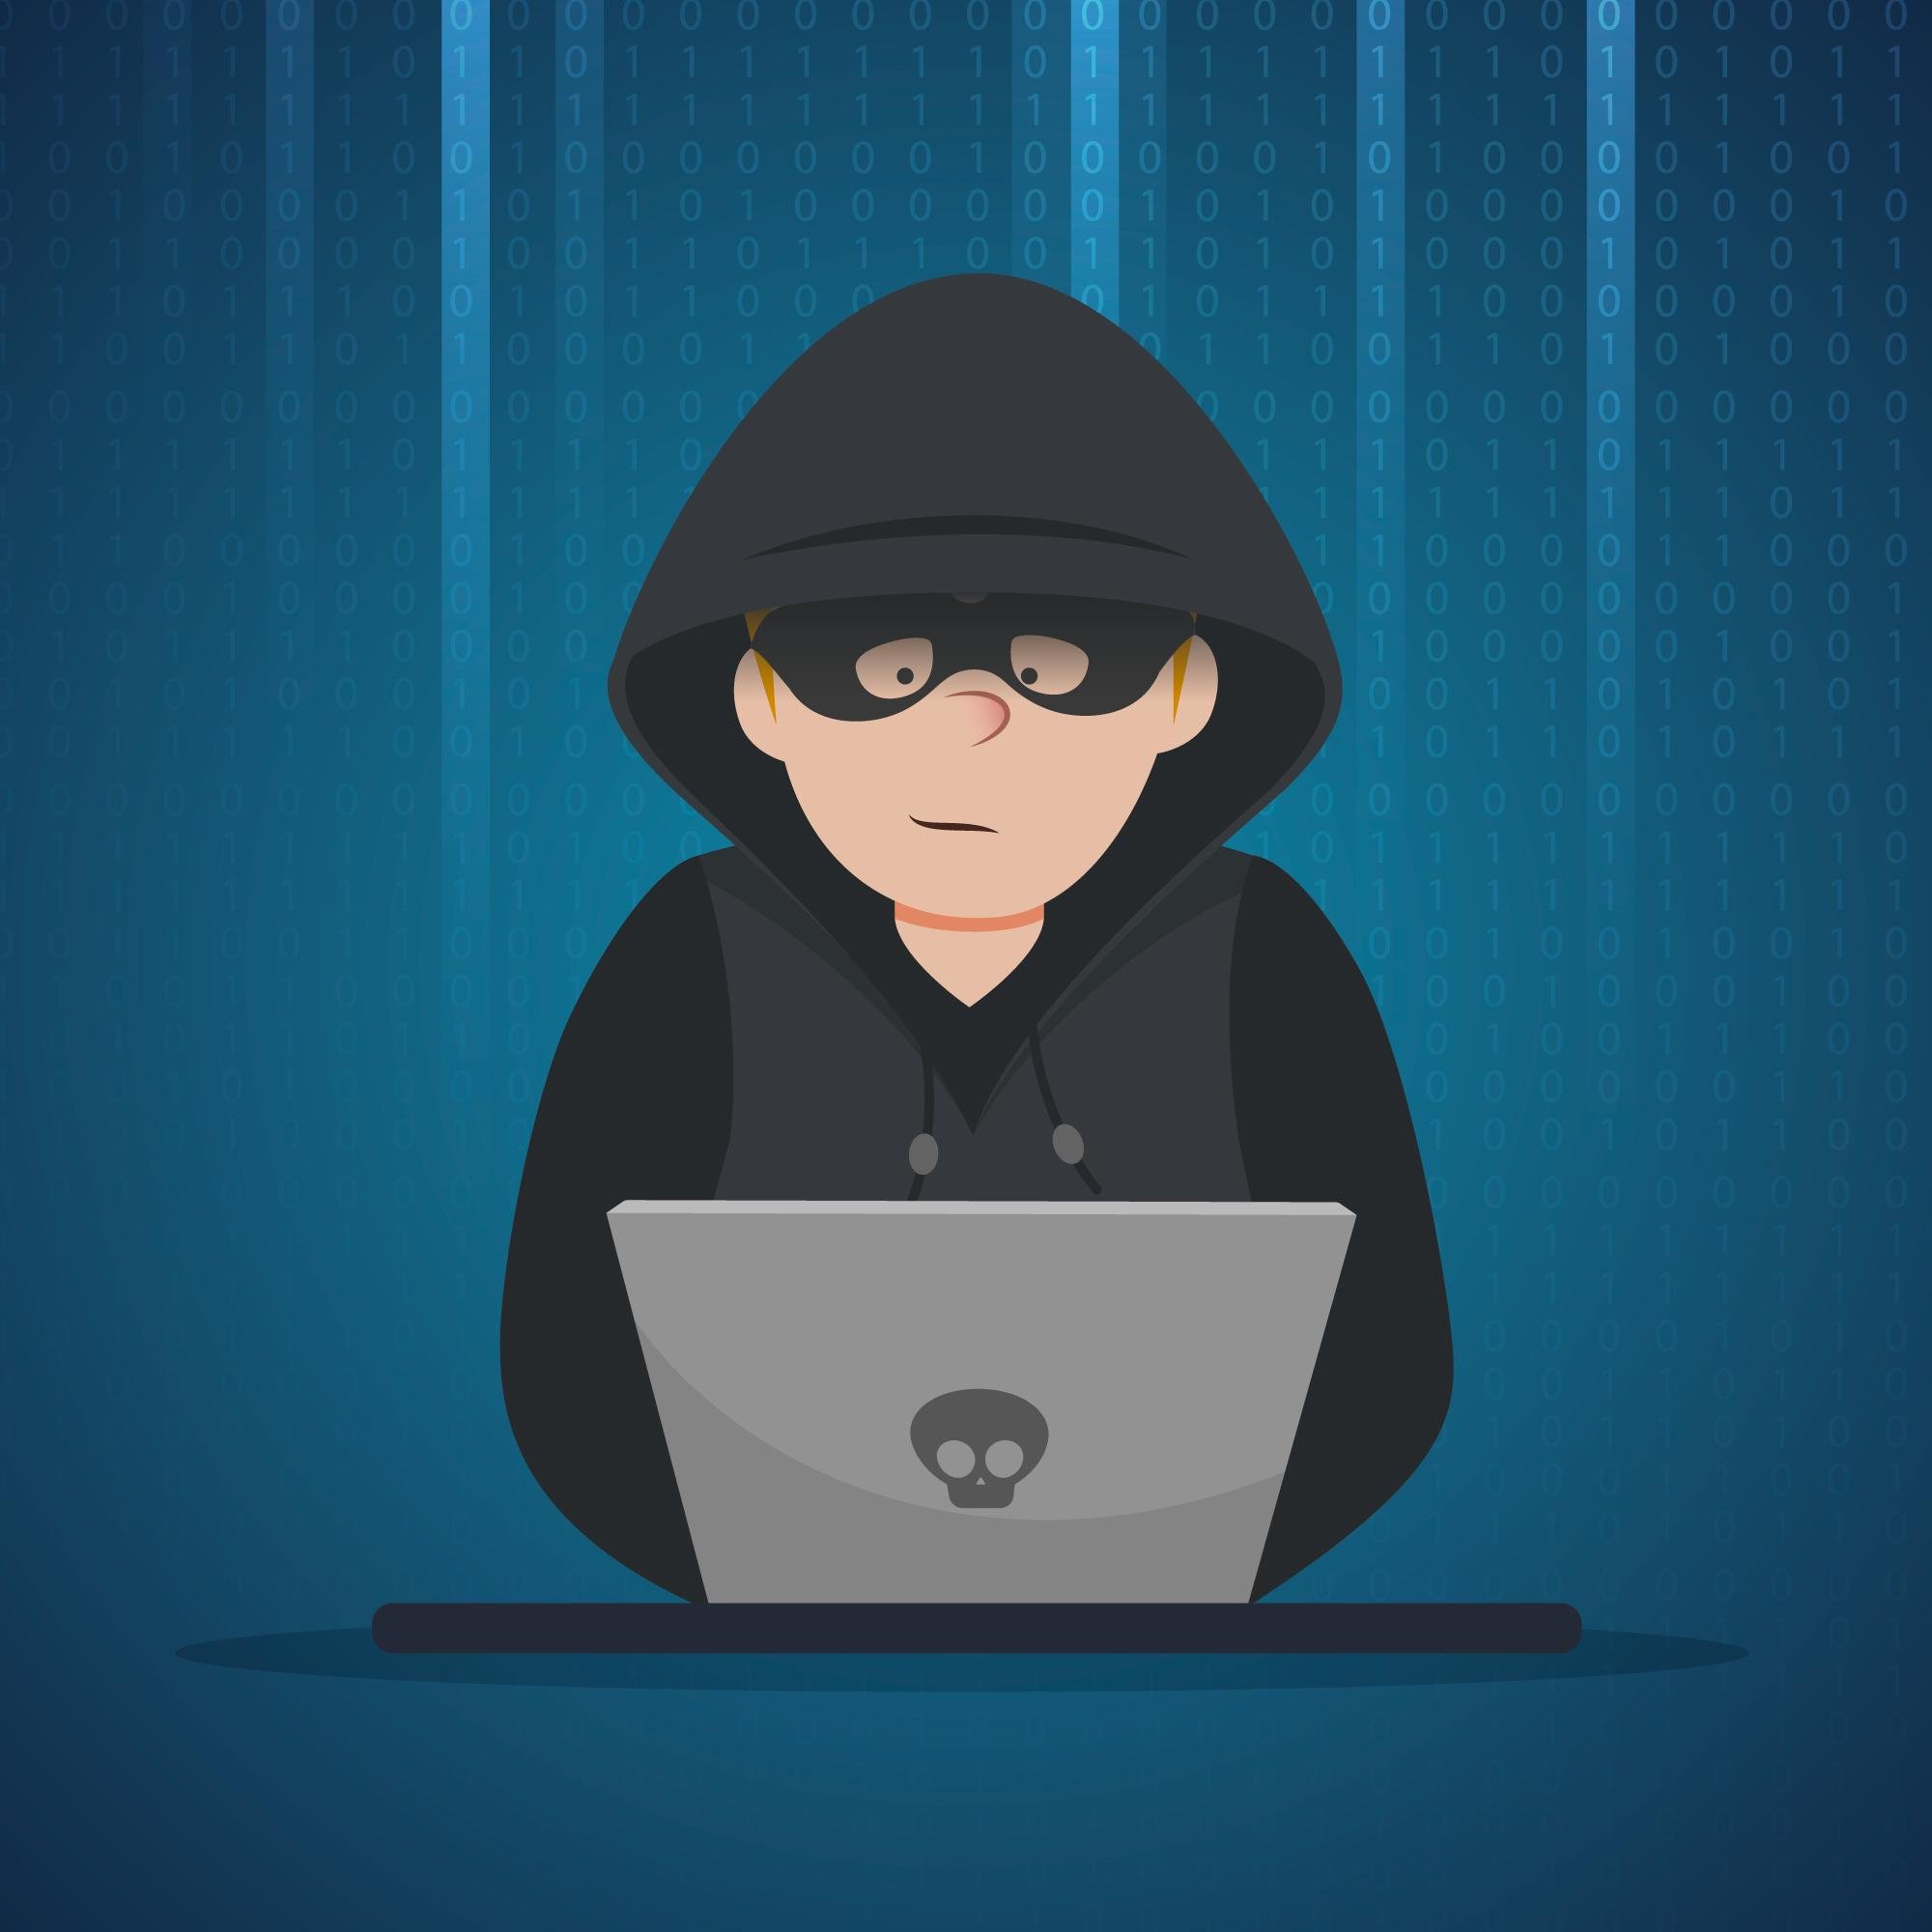 Image of a digital thief on a computer